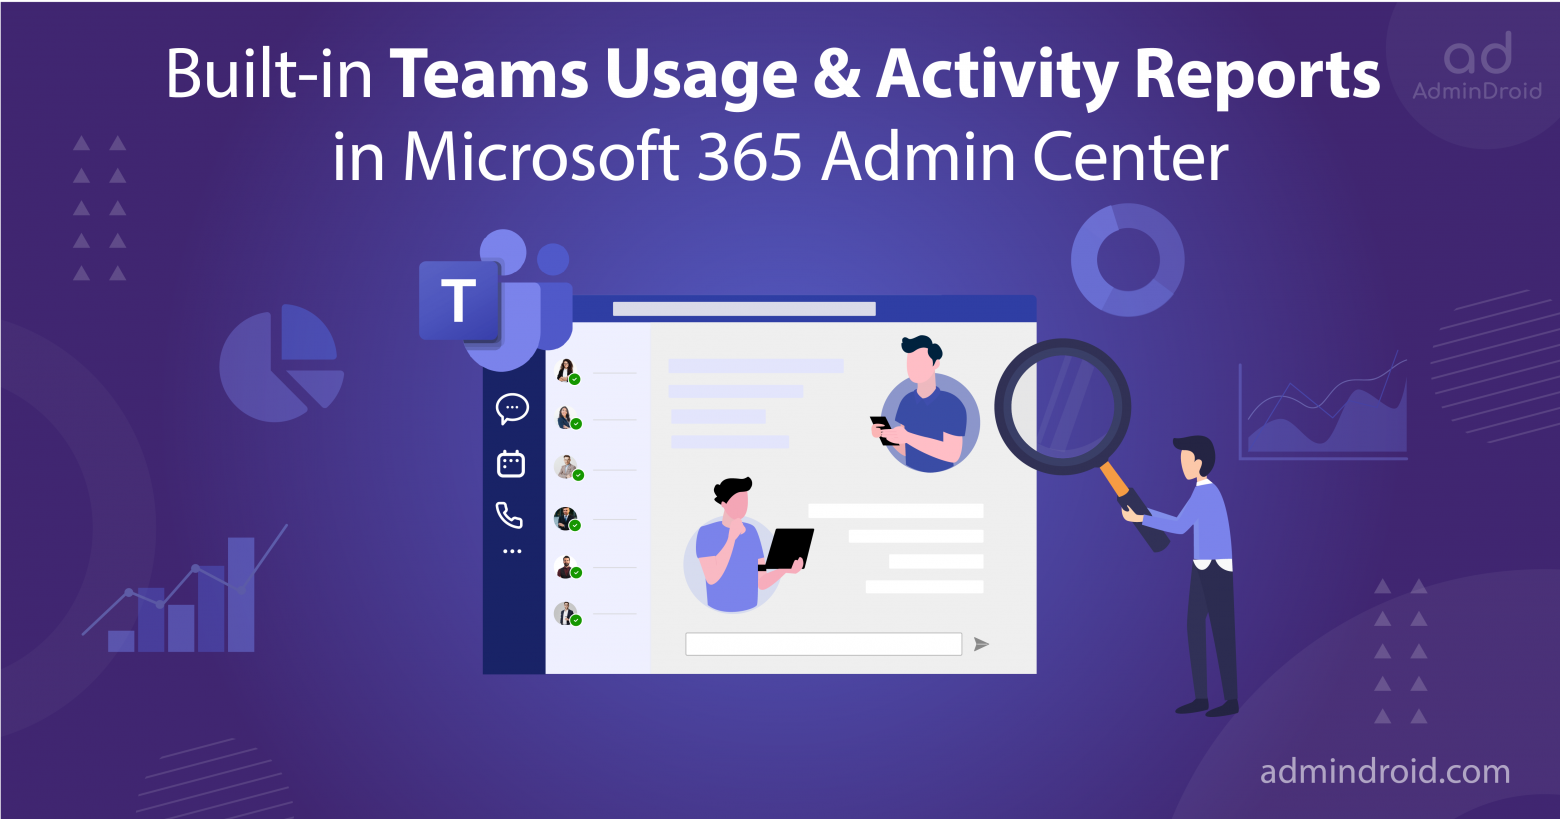 Built-in Teams Usage & Activity Reports in Microsoft 365 Admin Center